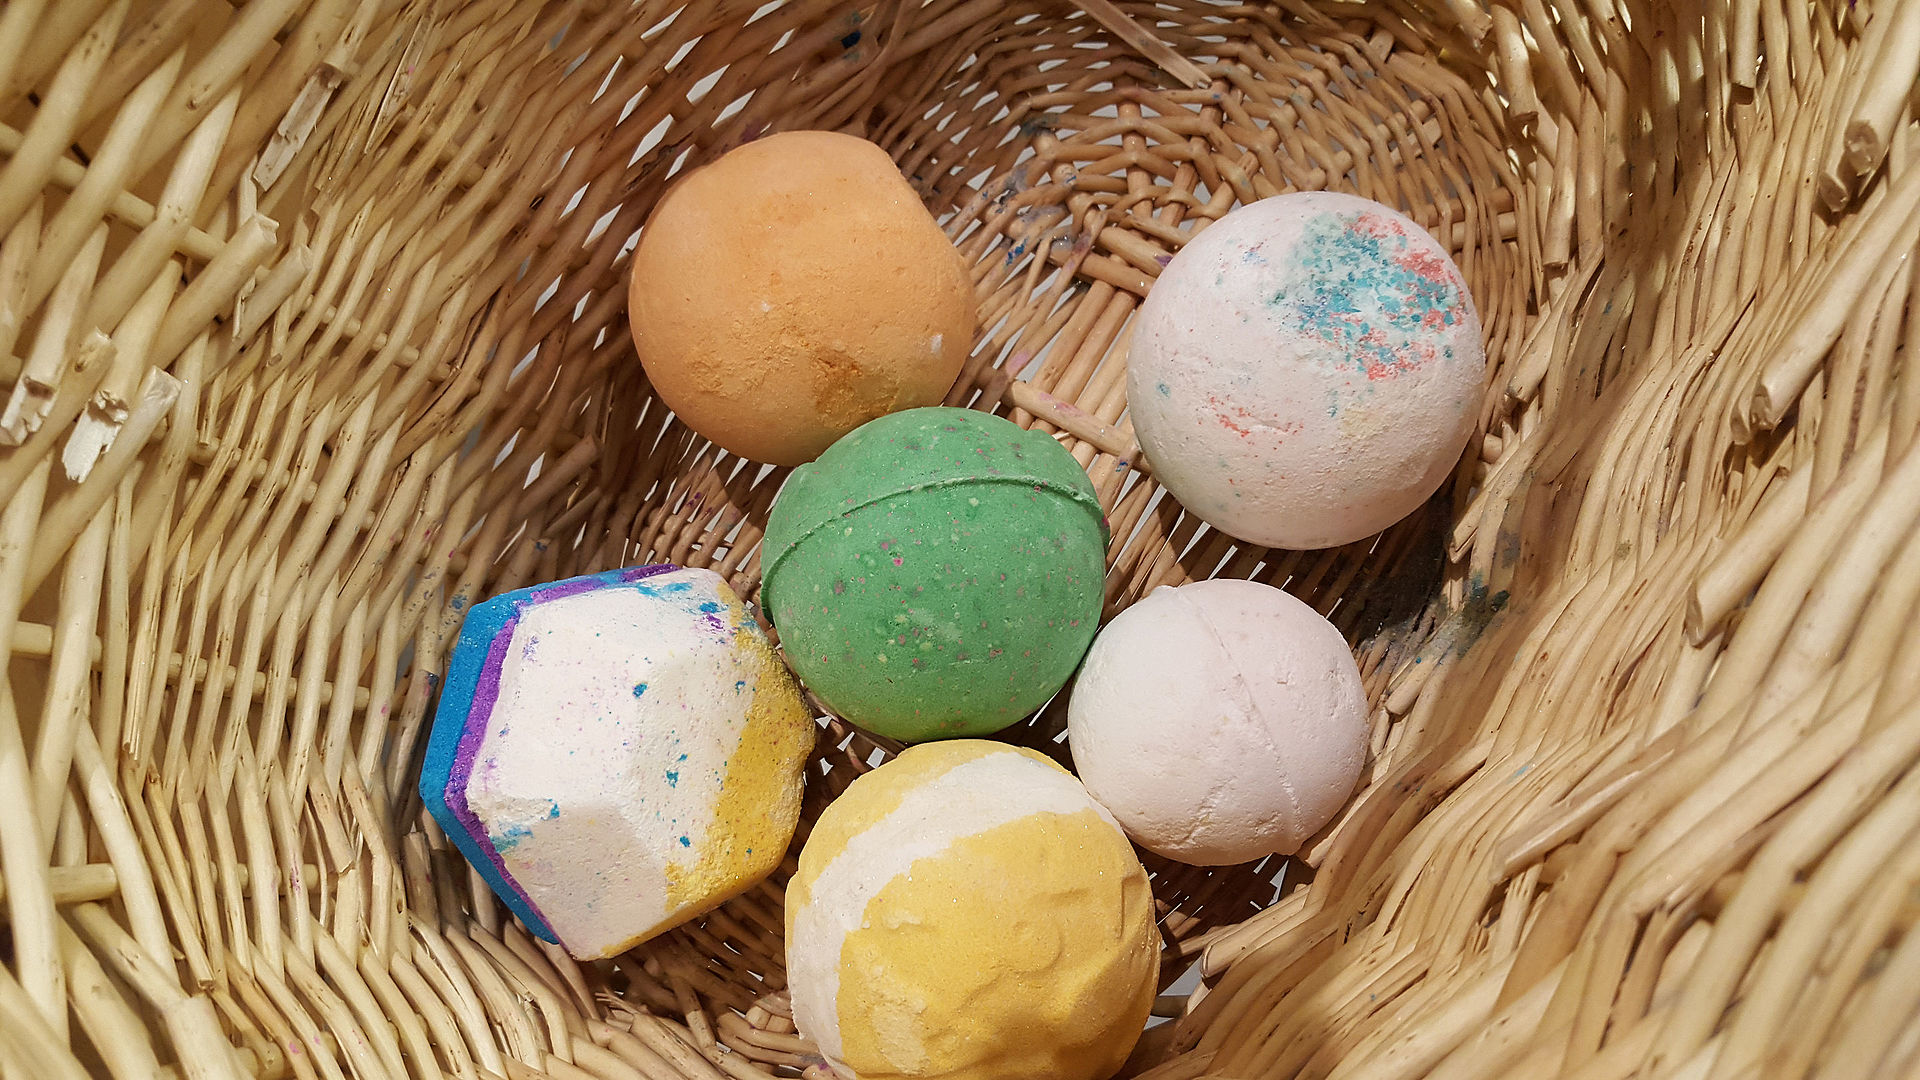 Oman beauty: Try aromatic bath bombs from Lush in Muscat